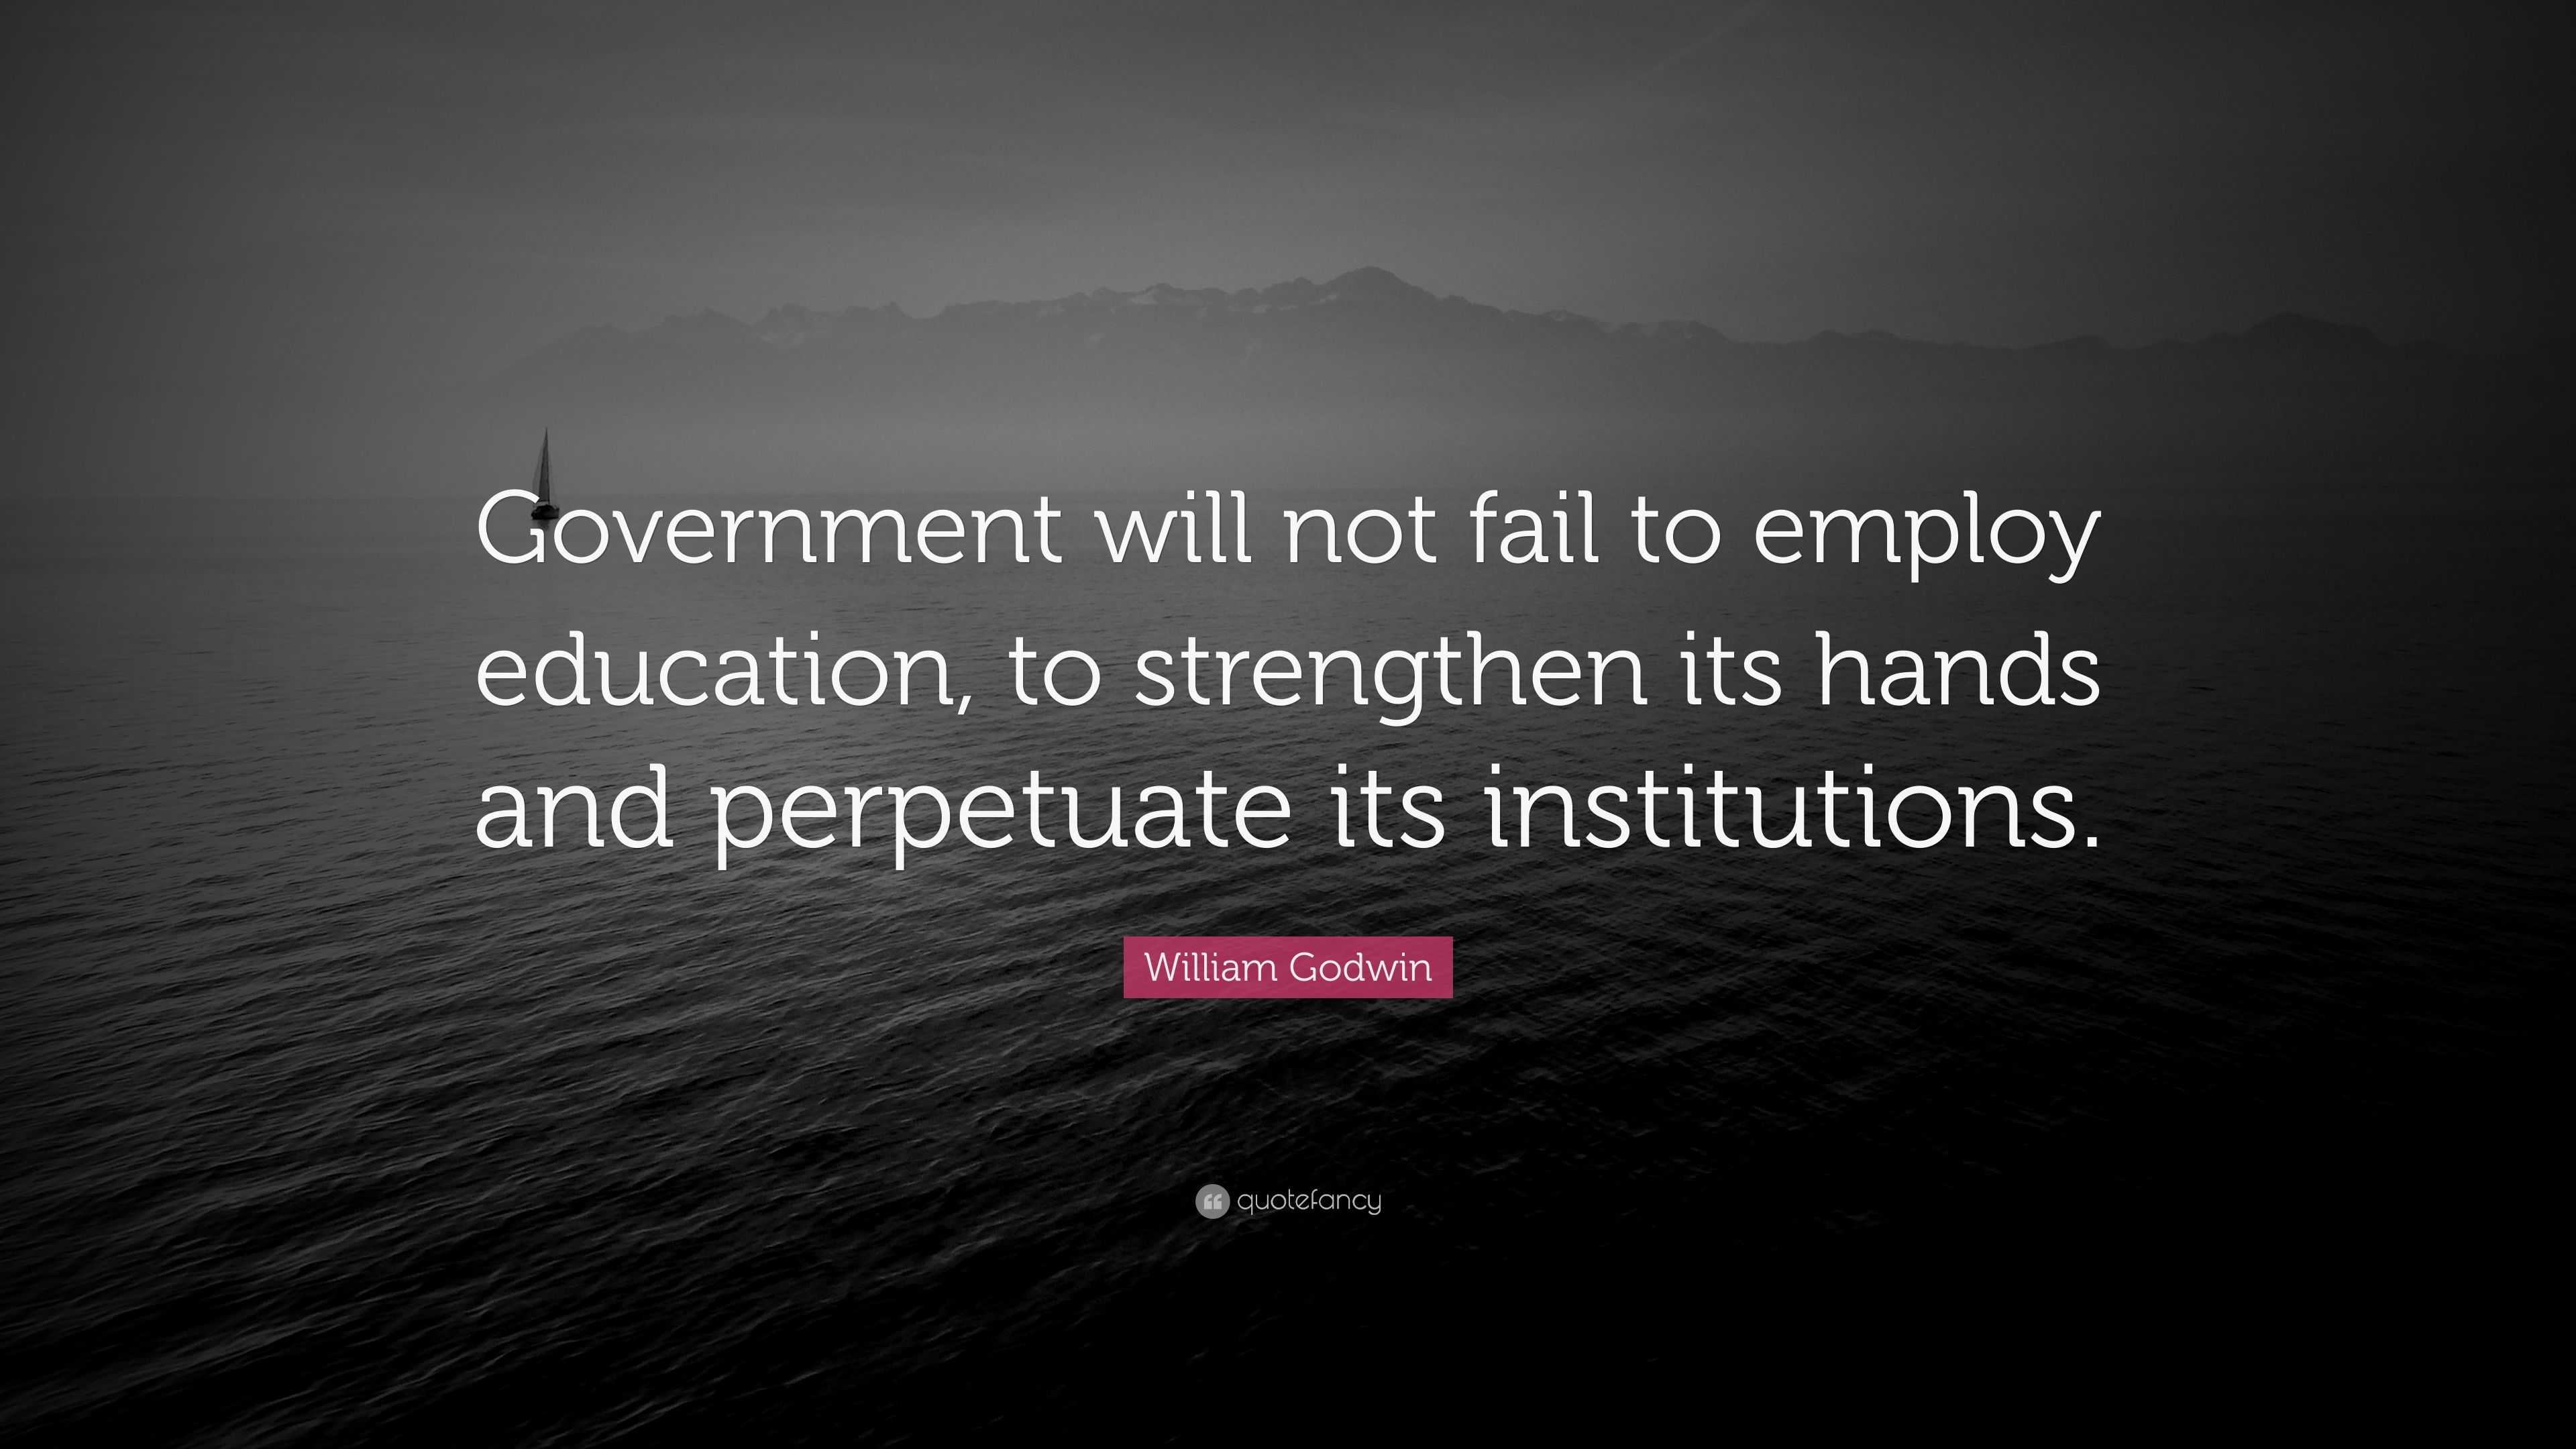 William Godwin Quote: “Government will not fail to employ education, to  strengthen its hands and perpetuate